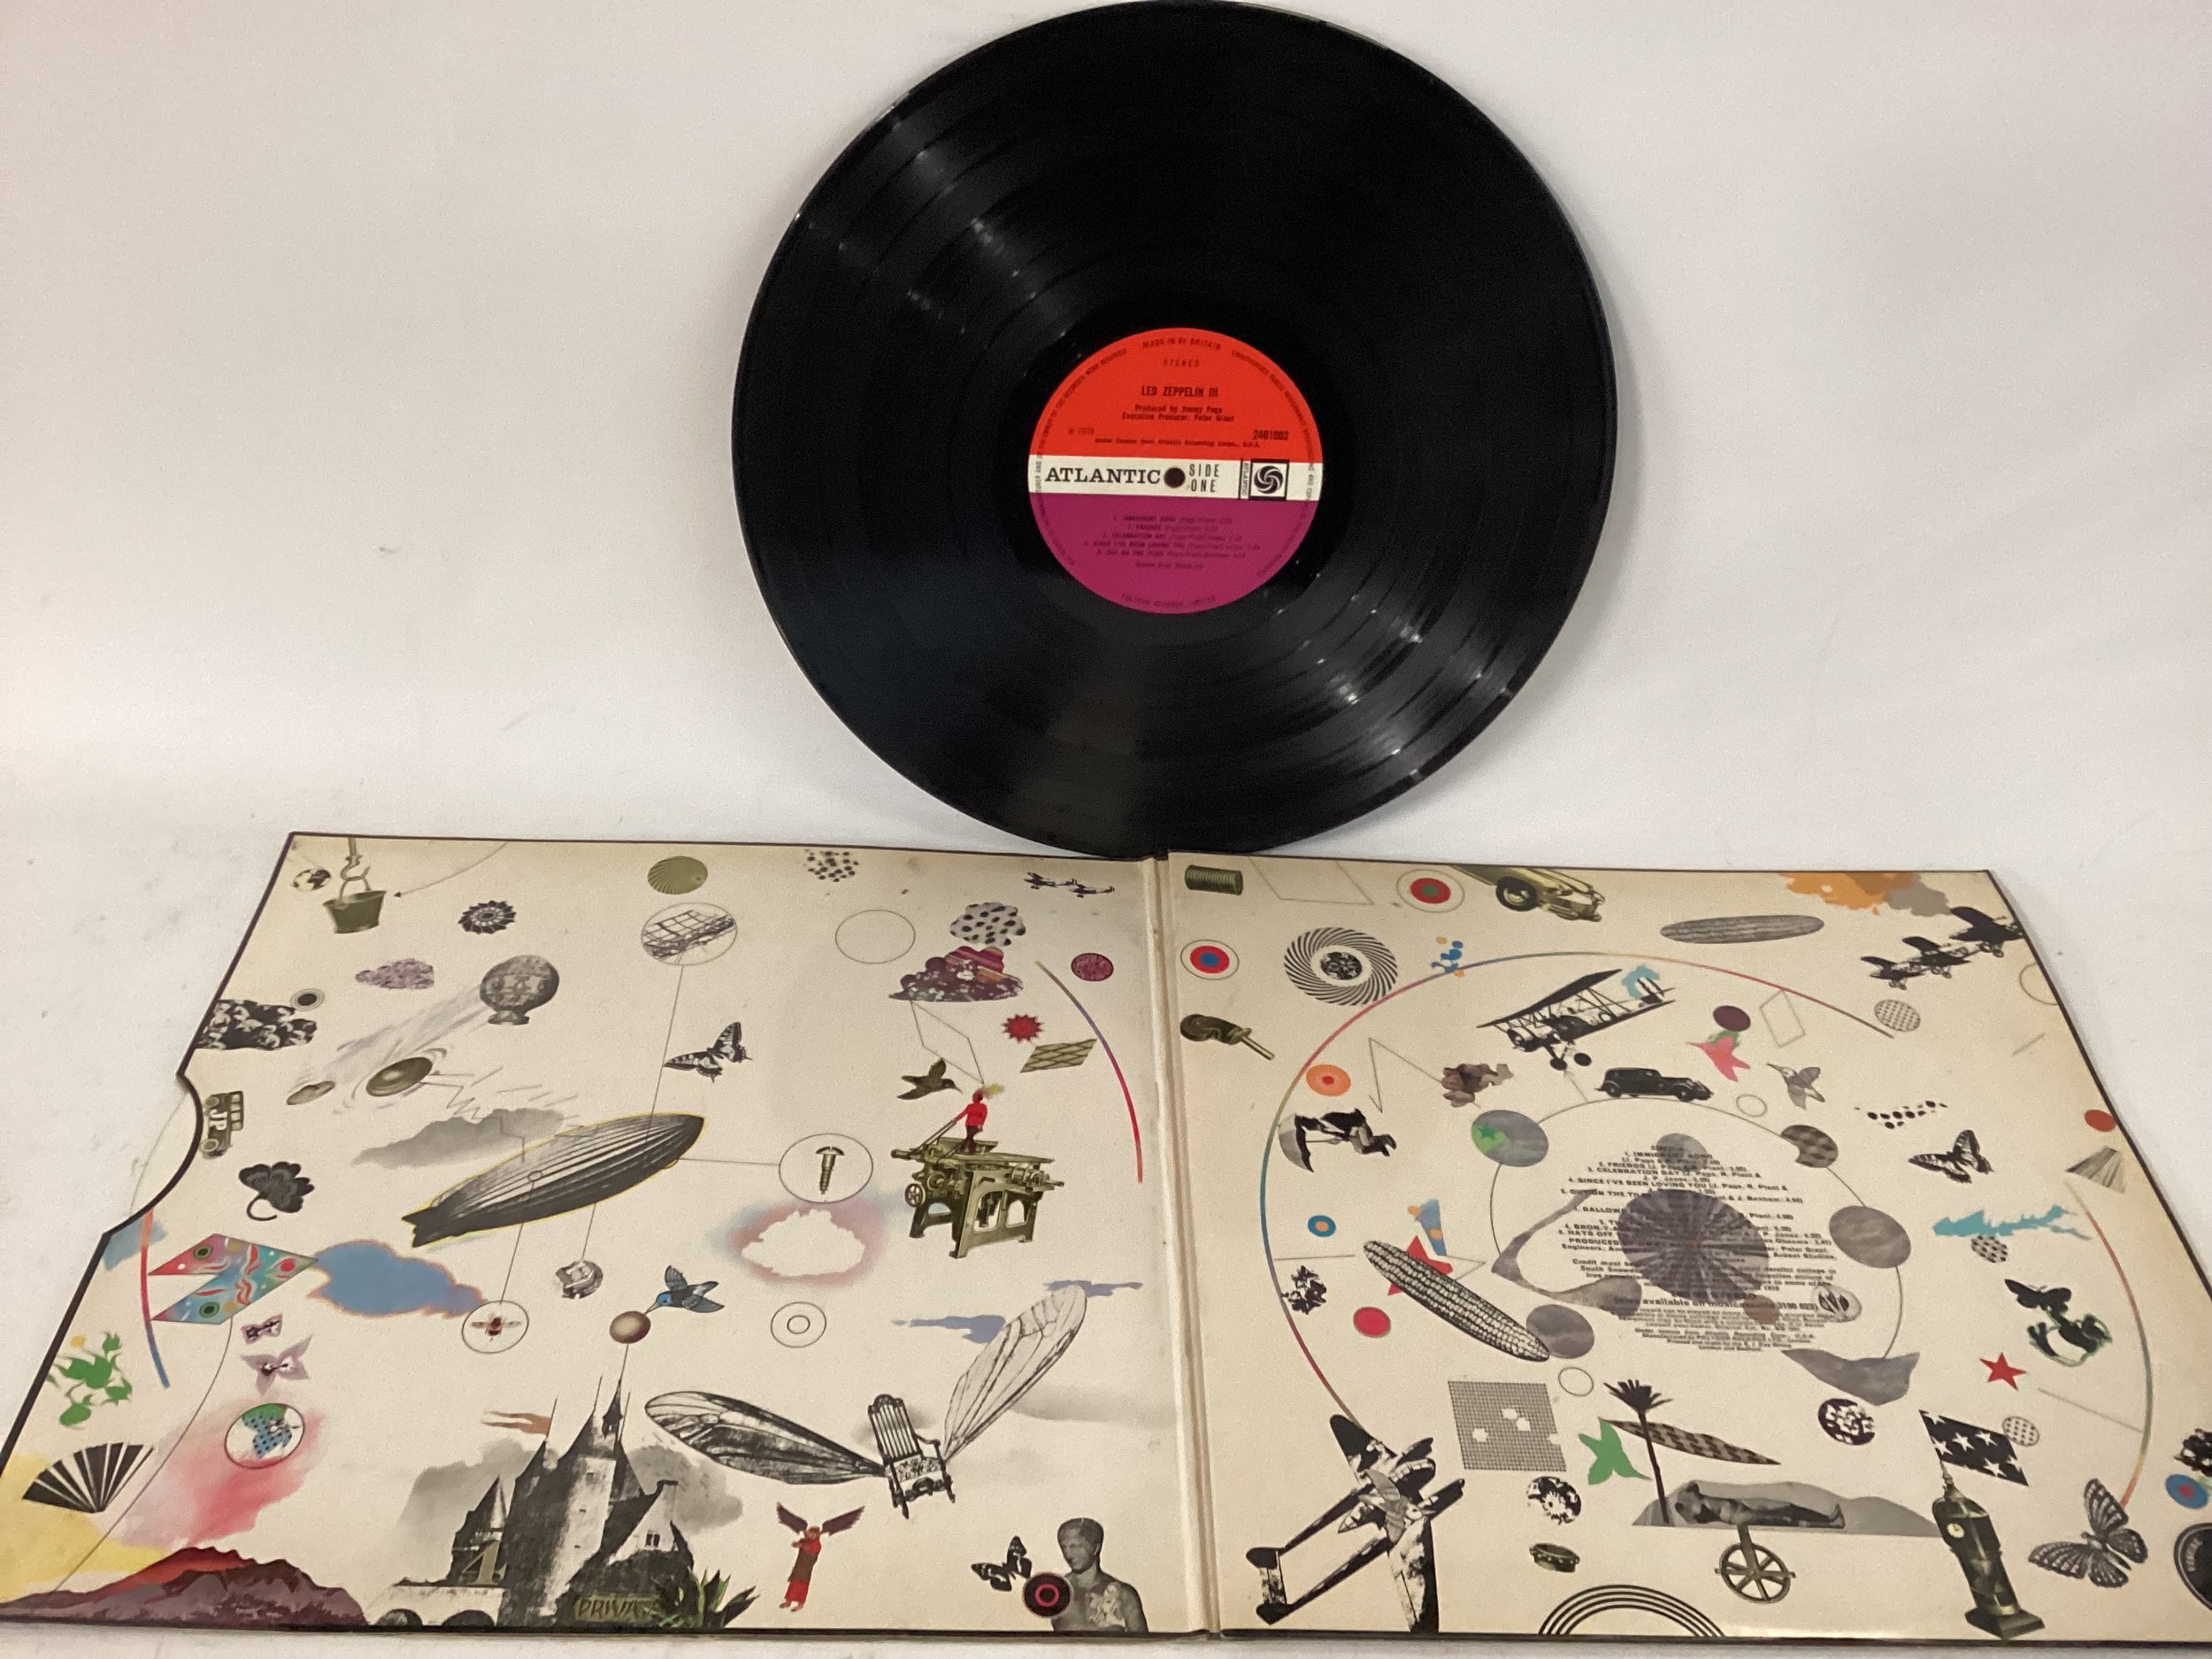 LED ZEPPELIN 1 / 2 & 3 PLUM LABEL VINYL ALBUMS. First we have a copy of their first album On - Image 4 of 7